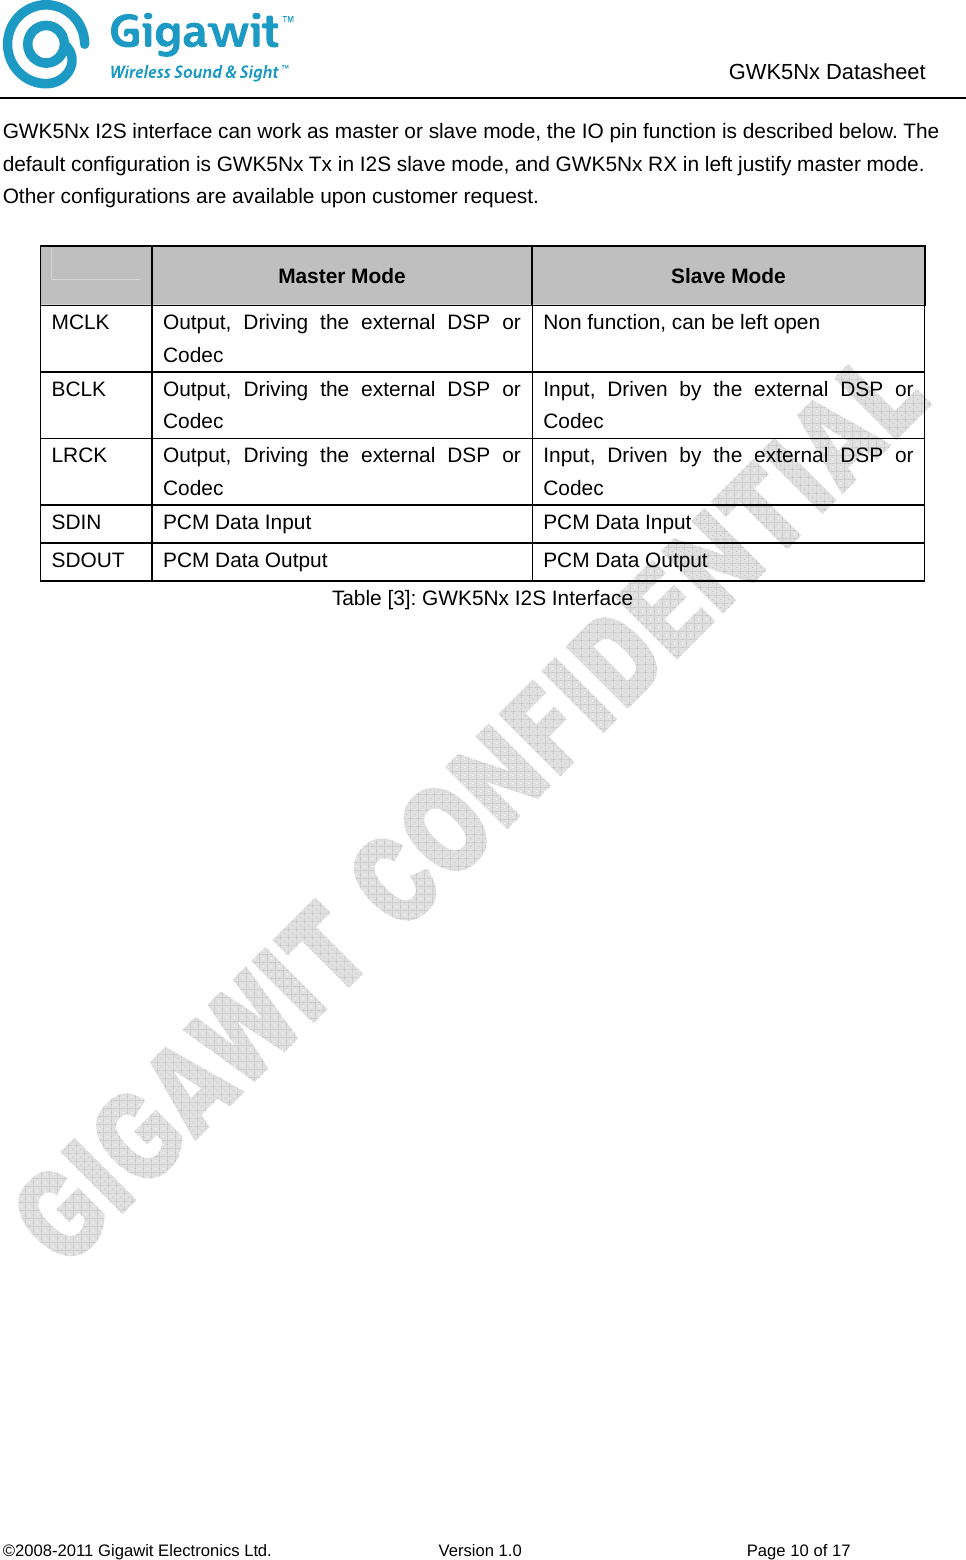                               ©2008-2011 Gigawit Electronics Ltd.                    Version 1.0                           Page 10 of 17  GWK5Nx Datasheet   GWK5Nx I2S interface can work as master or slave mode, the IO pin function is described below. The default configuration is GWK5Nx Tx in I2S slave mode, and GWK5Nx RX in left justify master mode. Other configurations are available upon customer request.   Master Mode Slave Mode MCLK  Output, Driving the external DSP or Codec Non function, can be left open BCLK  Output, Driving the external DSP or Codec Input, Driven by the external DSP or Codec LRCK  Output, Driving the external DSP or Codec Input, Driven by the external DSP or Codec SDIN  PCM Data Input  PCM Data Input SDOUT  PCM Data Output  PCM Data Output Table [3]: GWK5Nx I2S Interface   